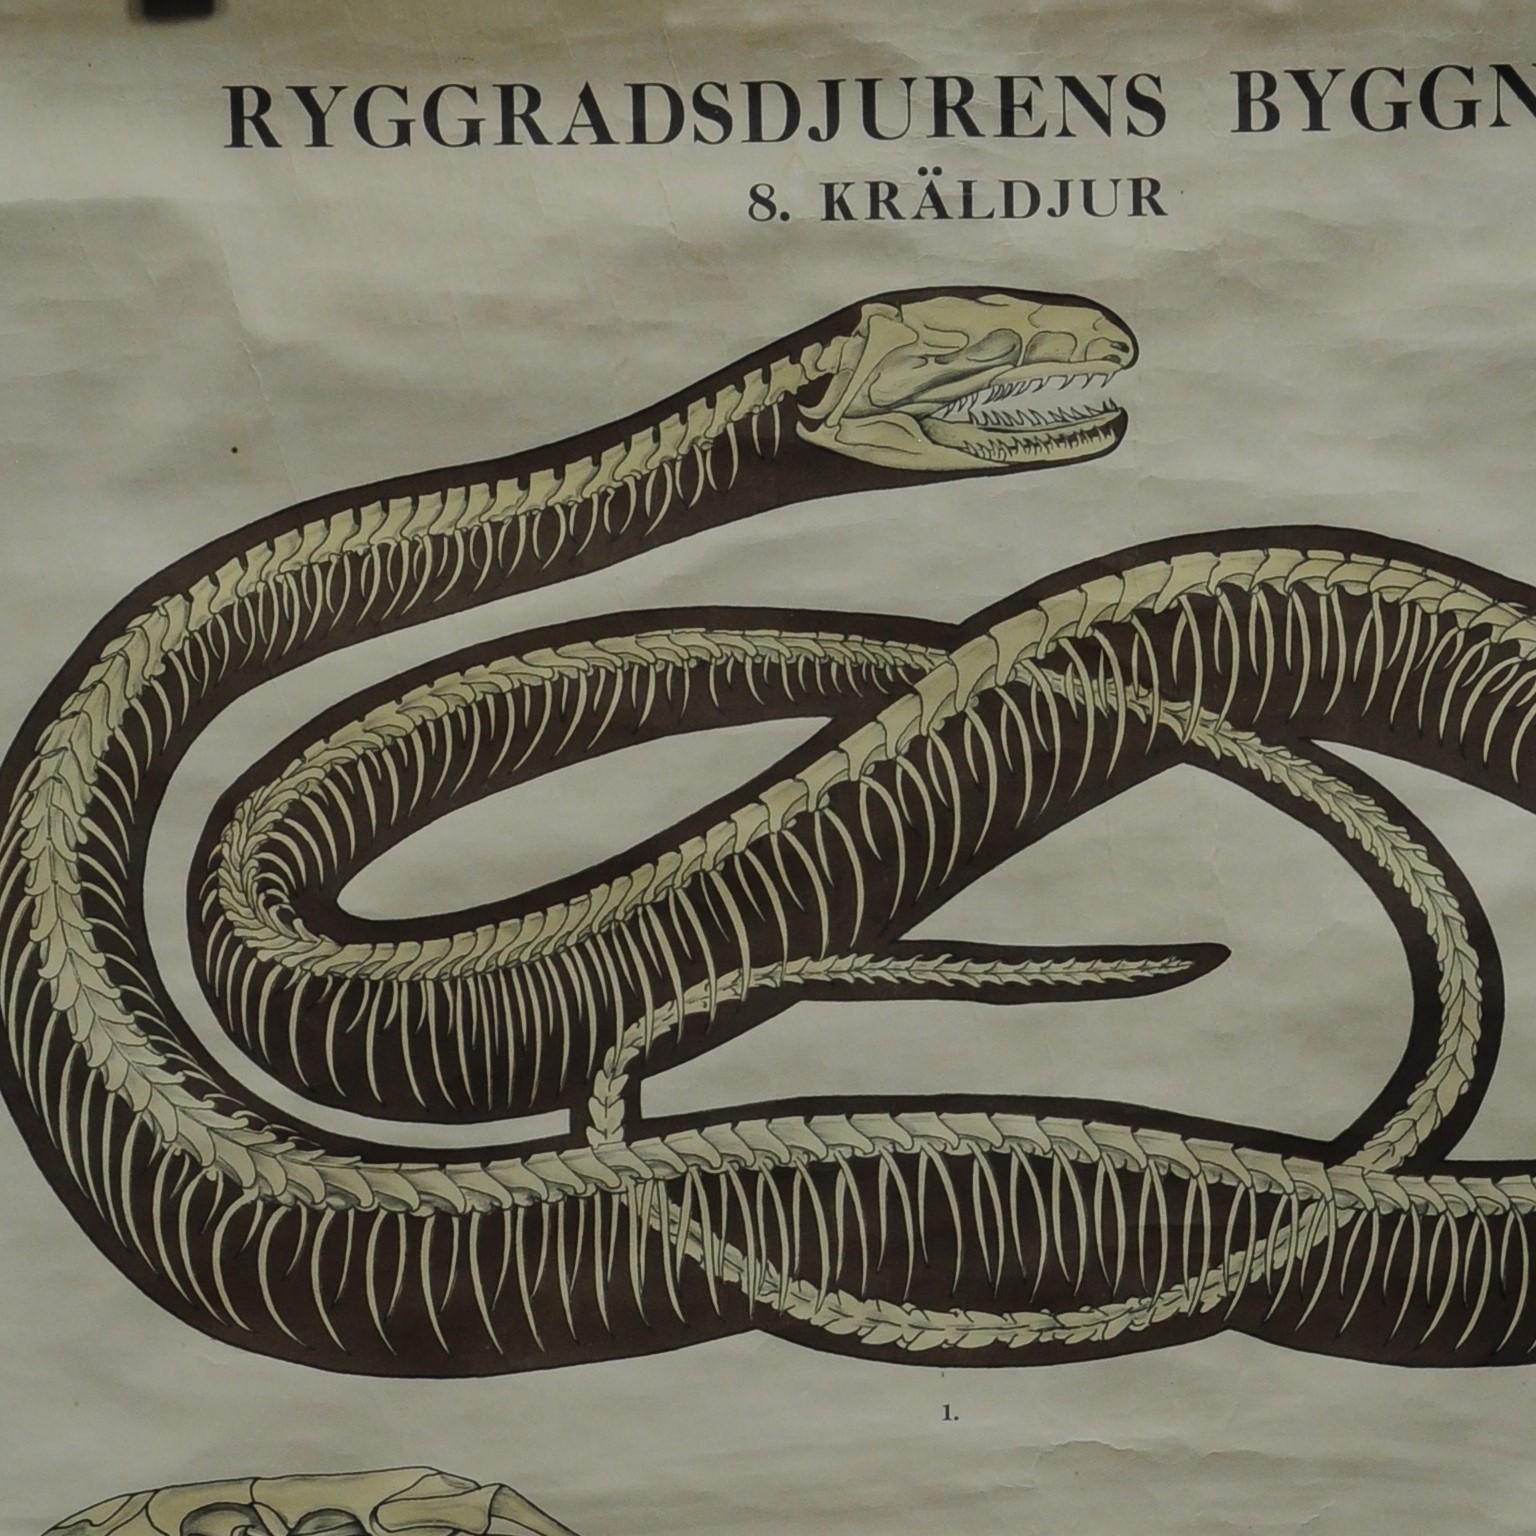 The rollable Swedish wall chart illustrates the bone structure of reptiles e.g. snake, lizard, turtle, common viper and crocodile. Colorful print on paper reinforced with canvas. Ryggradsjurens Byggnad 8. Kräldjur.
Measurements:
Width: 69cm (27.17